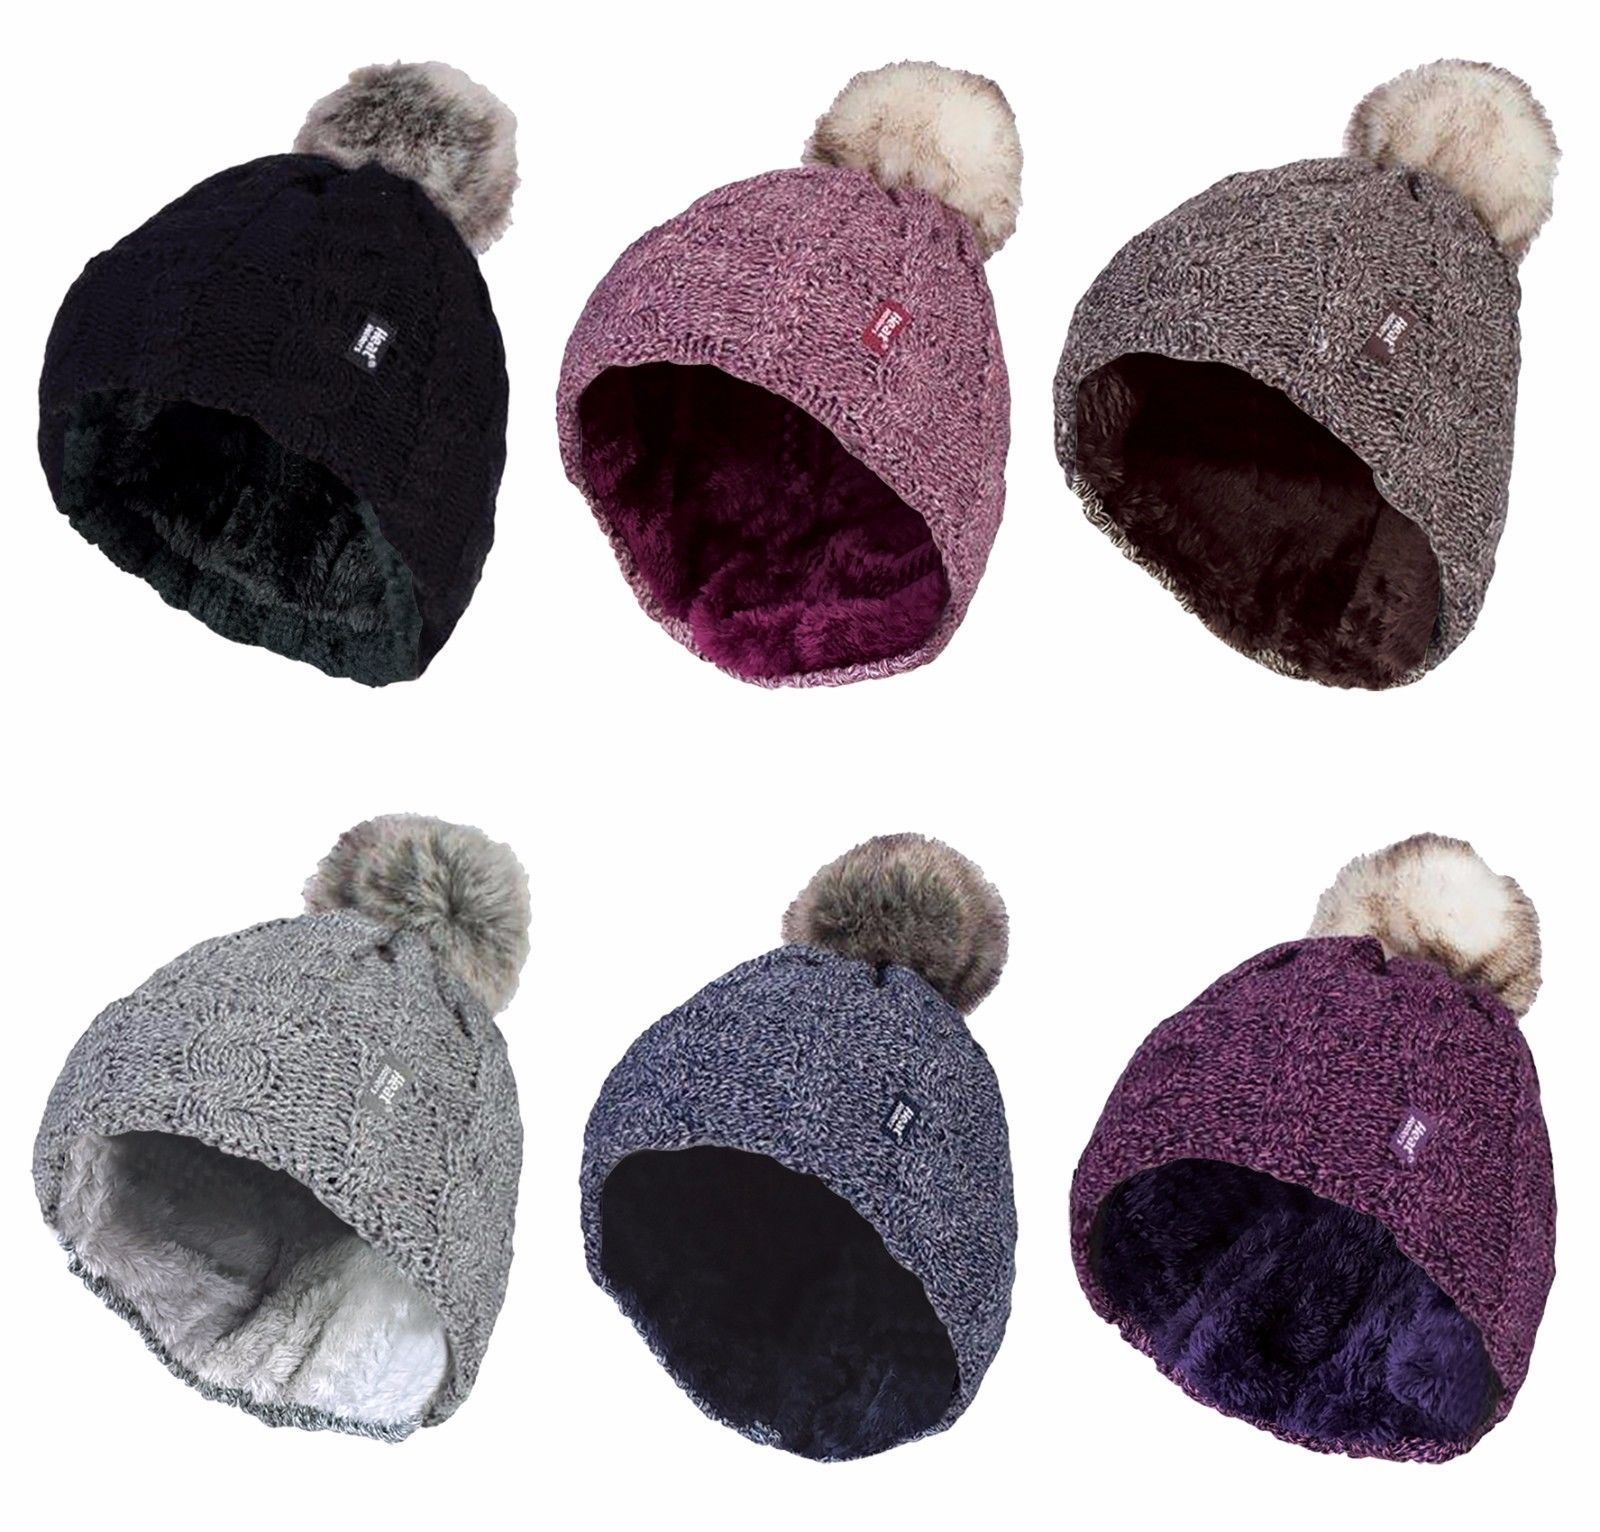 Heat Holders - Womens Fleece Lined Cable Knit Winter Beanie Hat with Pom Pom